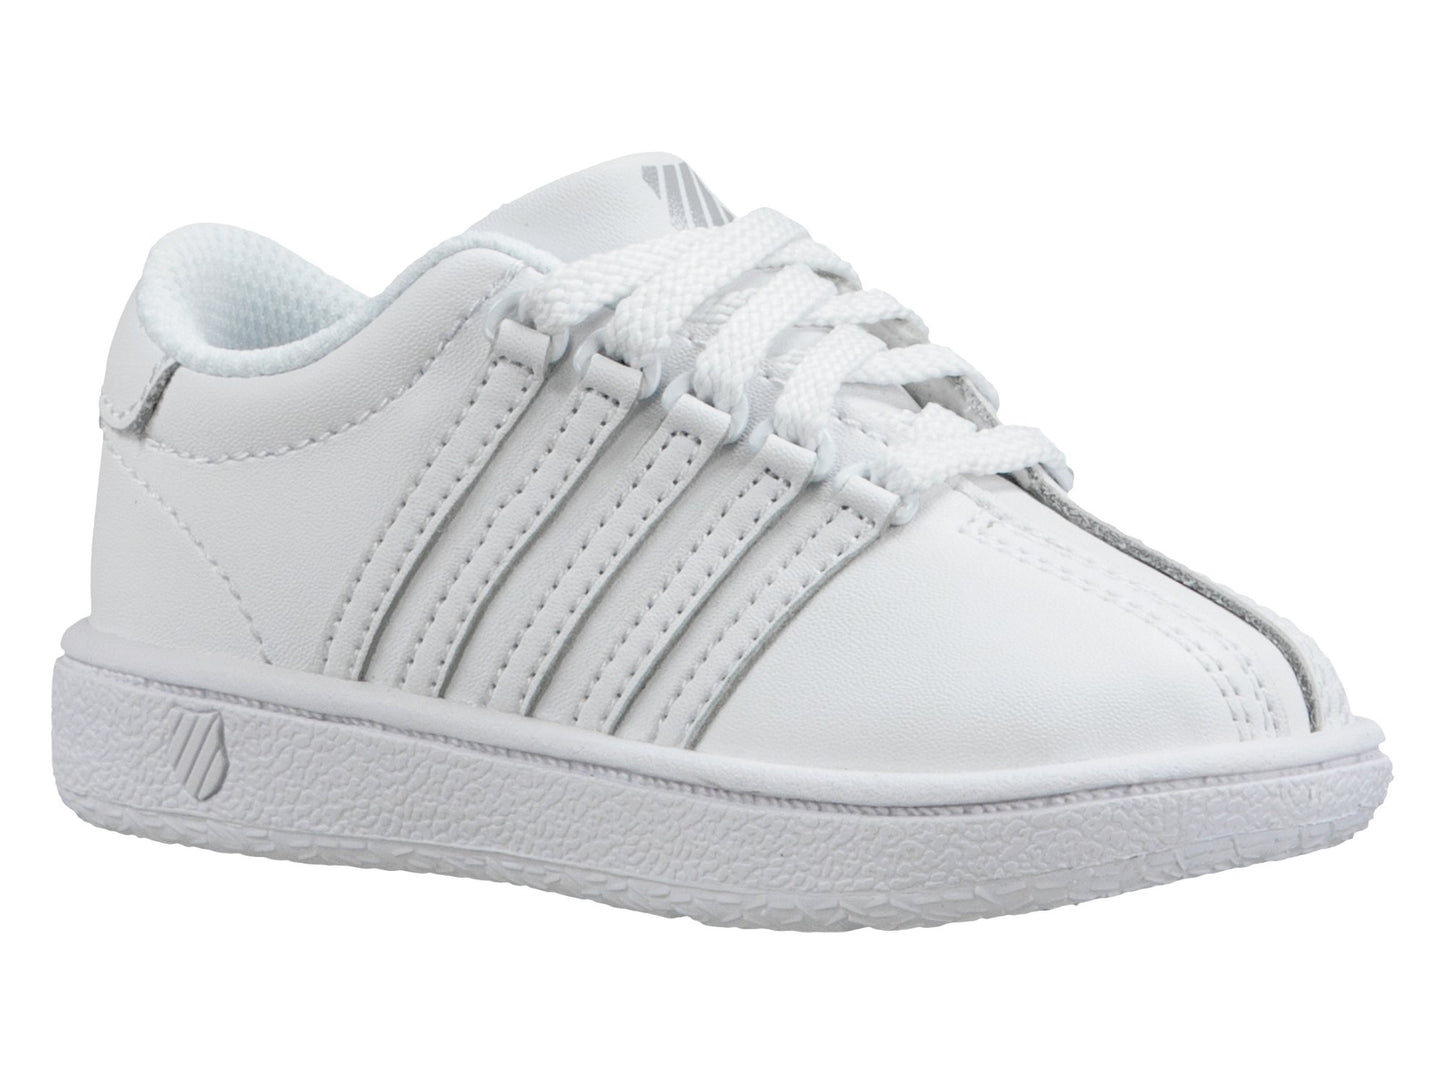 K-Swiss Infant Toddler Classic VN Medium Low Top Shoes White / White 23343-912-M